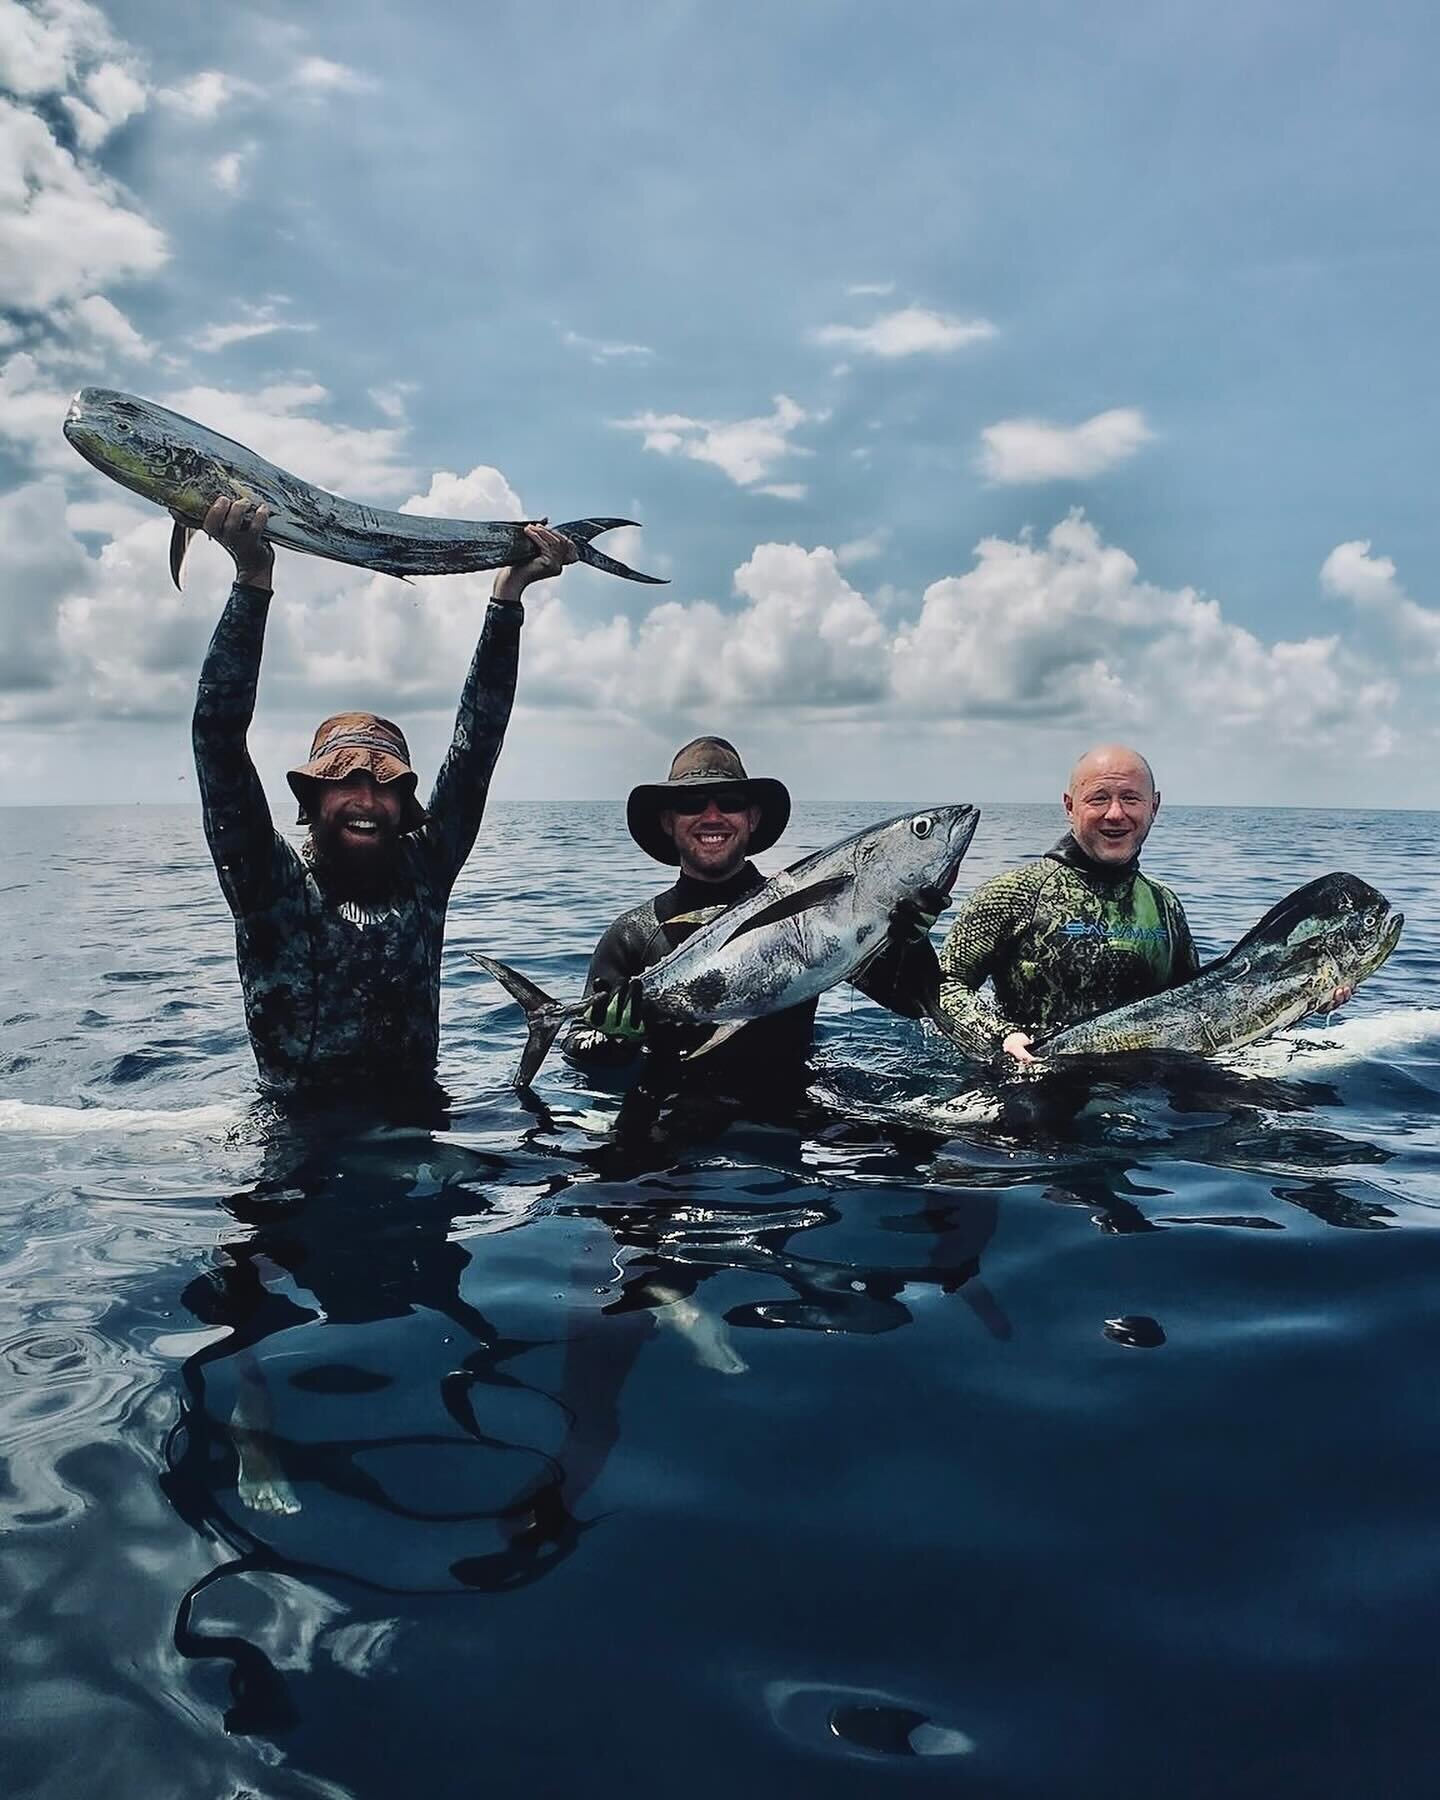 Get your fins on and join the action with Fusion Freedive and Spearfishing! 🌊 We&rsquo;re out here slaying the sustainable game, shooting our best shot and living it up like there&rsquo;s no tomorrow. 🎣 From epic underwater hunts to badass memories